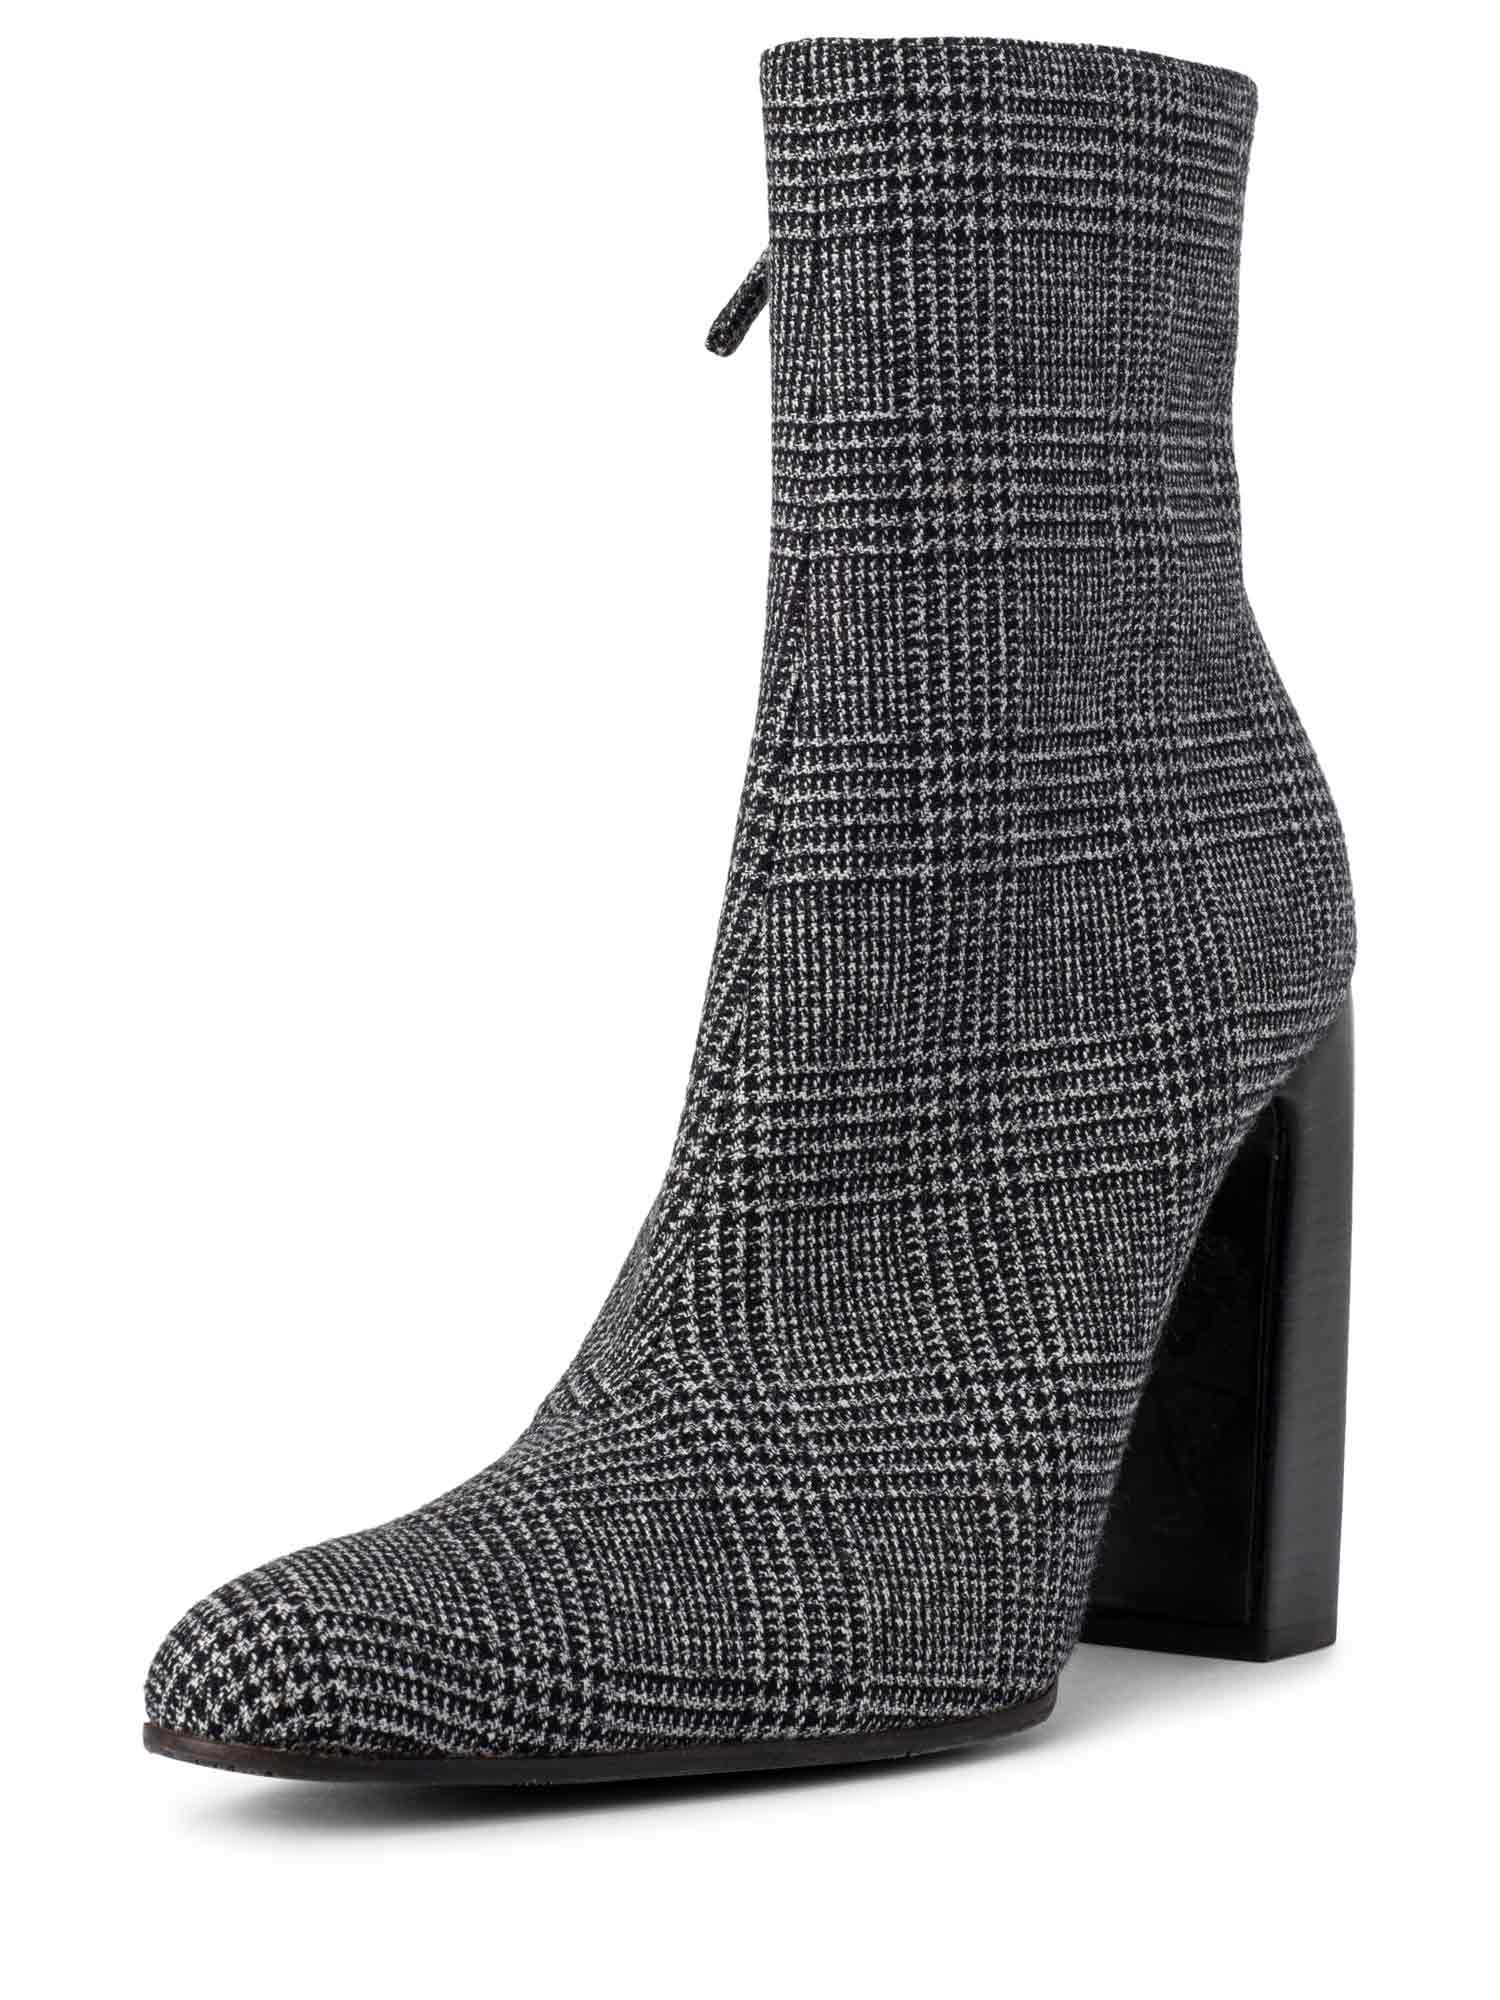 Balenciaga Houndstooth Wool Ankle Boots Black White-designer resale